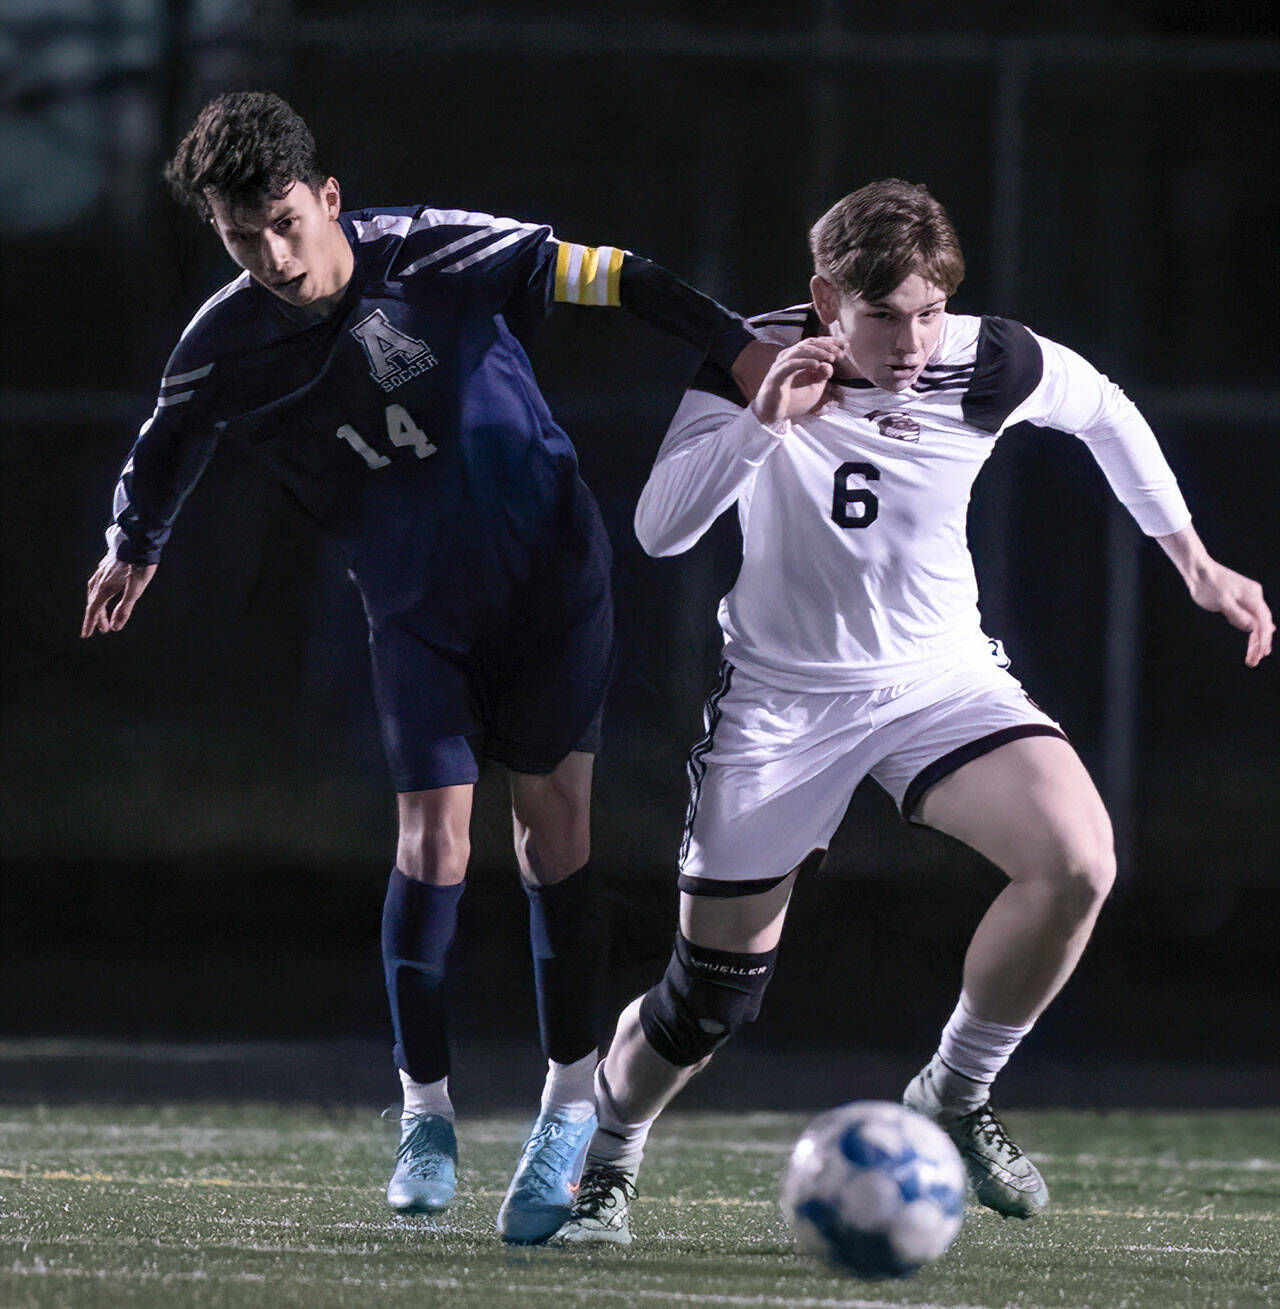 Monroe’s Owen Skurdal chases down the ball during a game against Arlington on March 18 in Arlington. (Kevin Clark / The Herald)